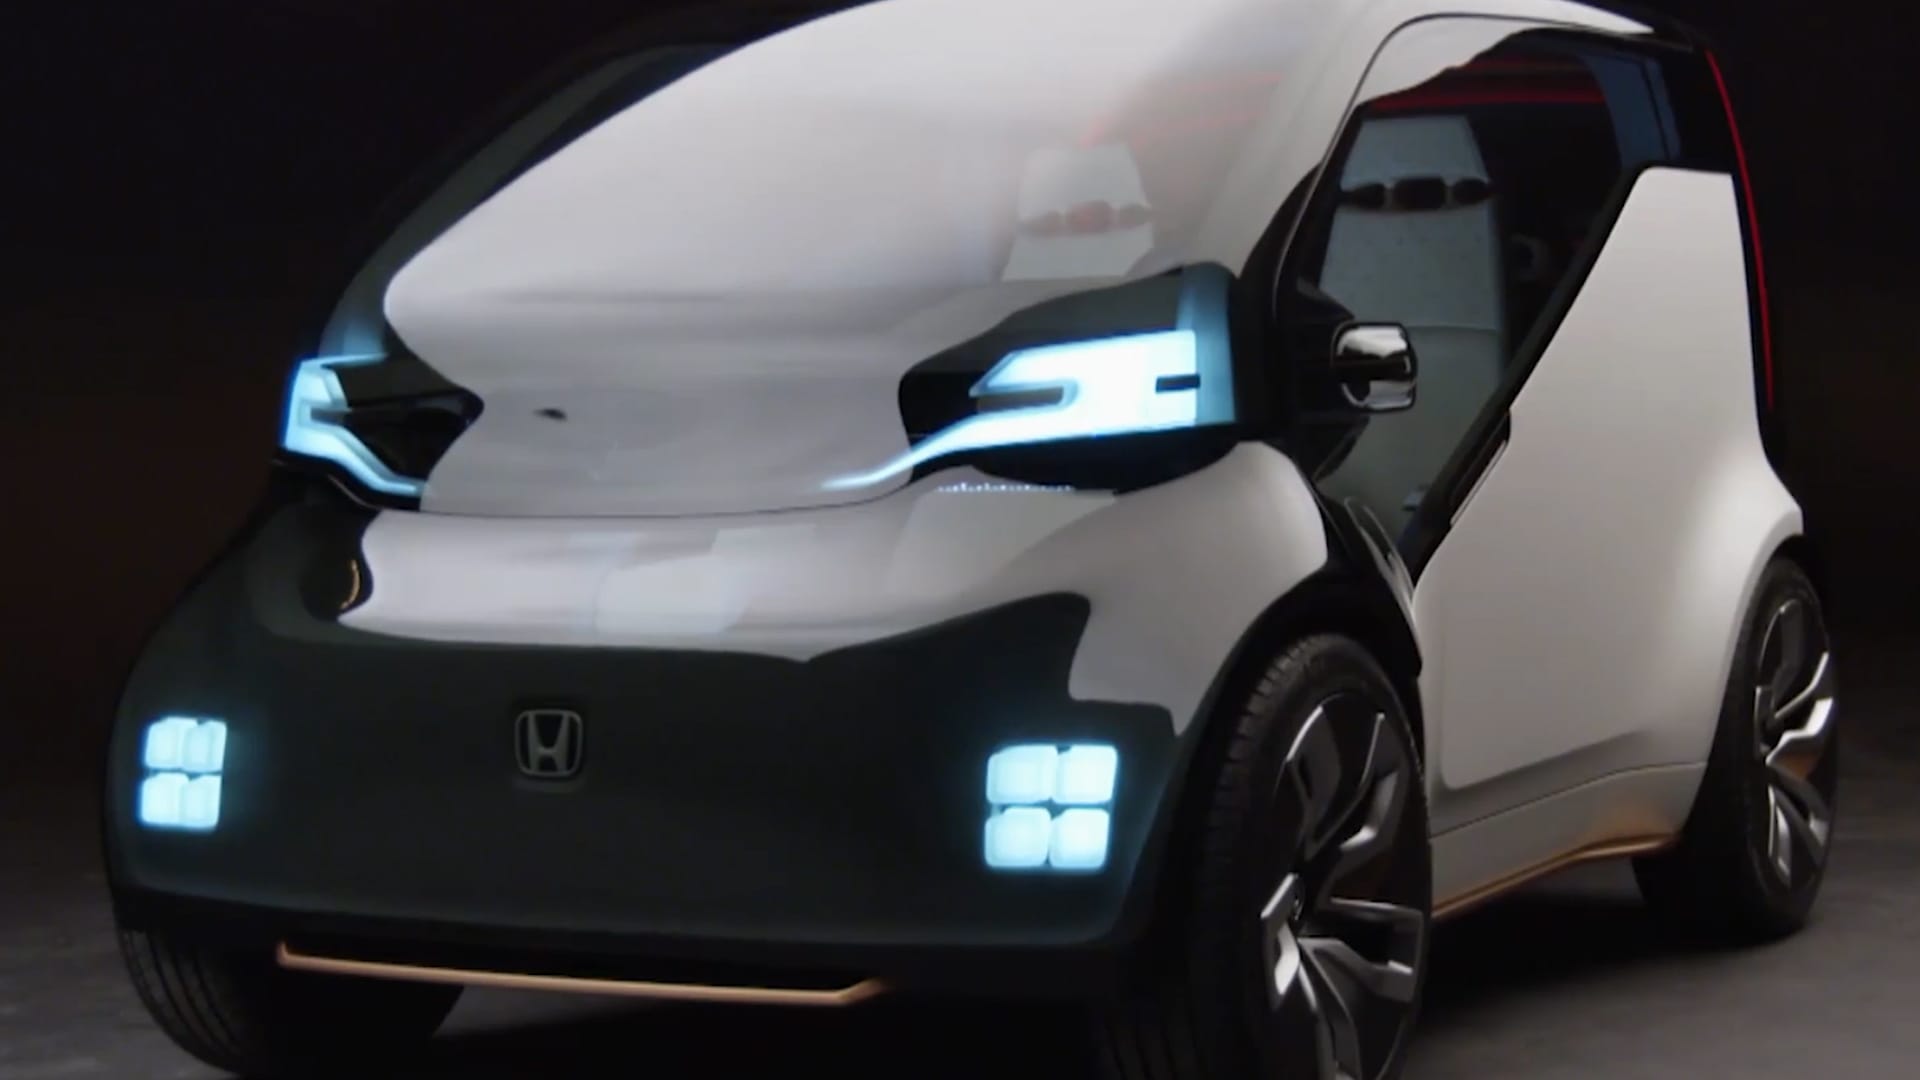 Honda's futuristic concept car has artificial intelligence and wants to ...